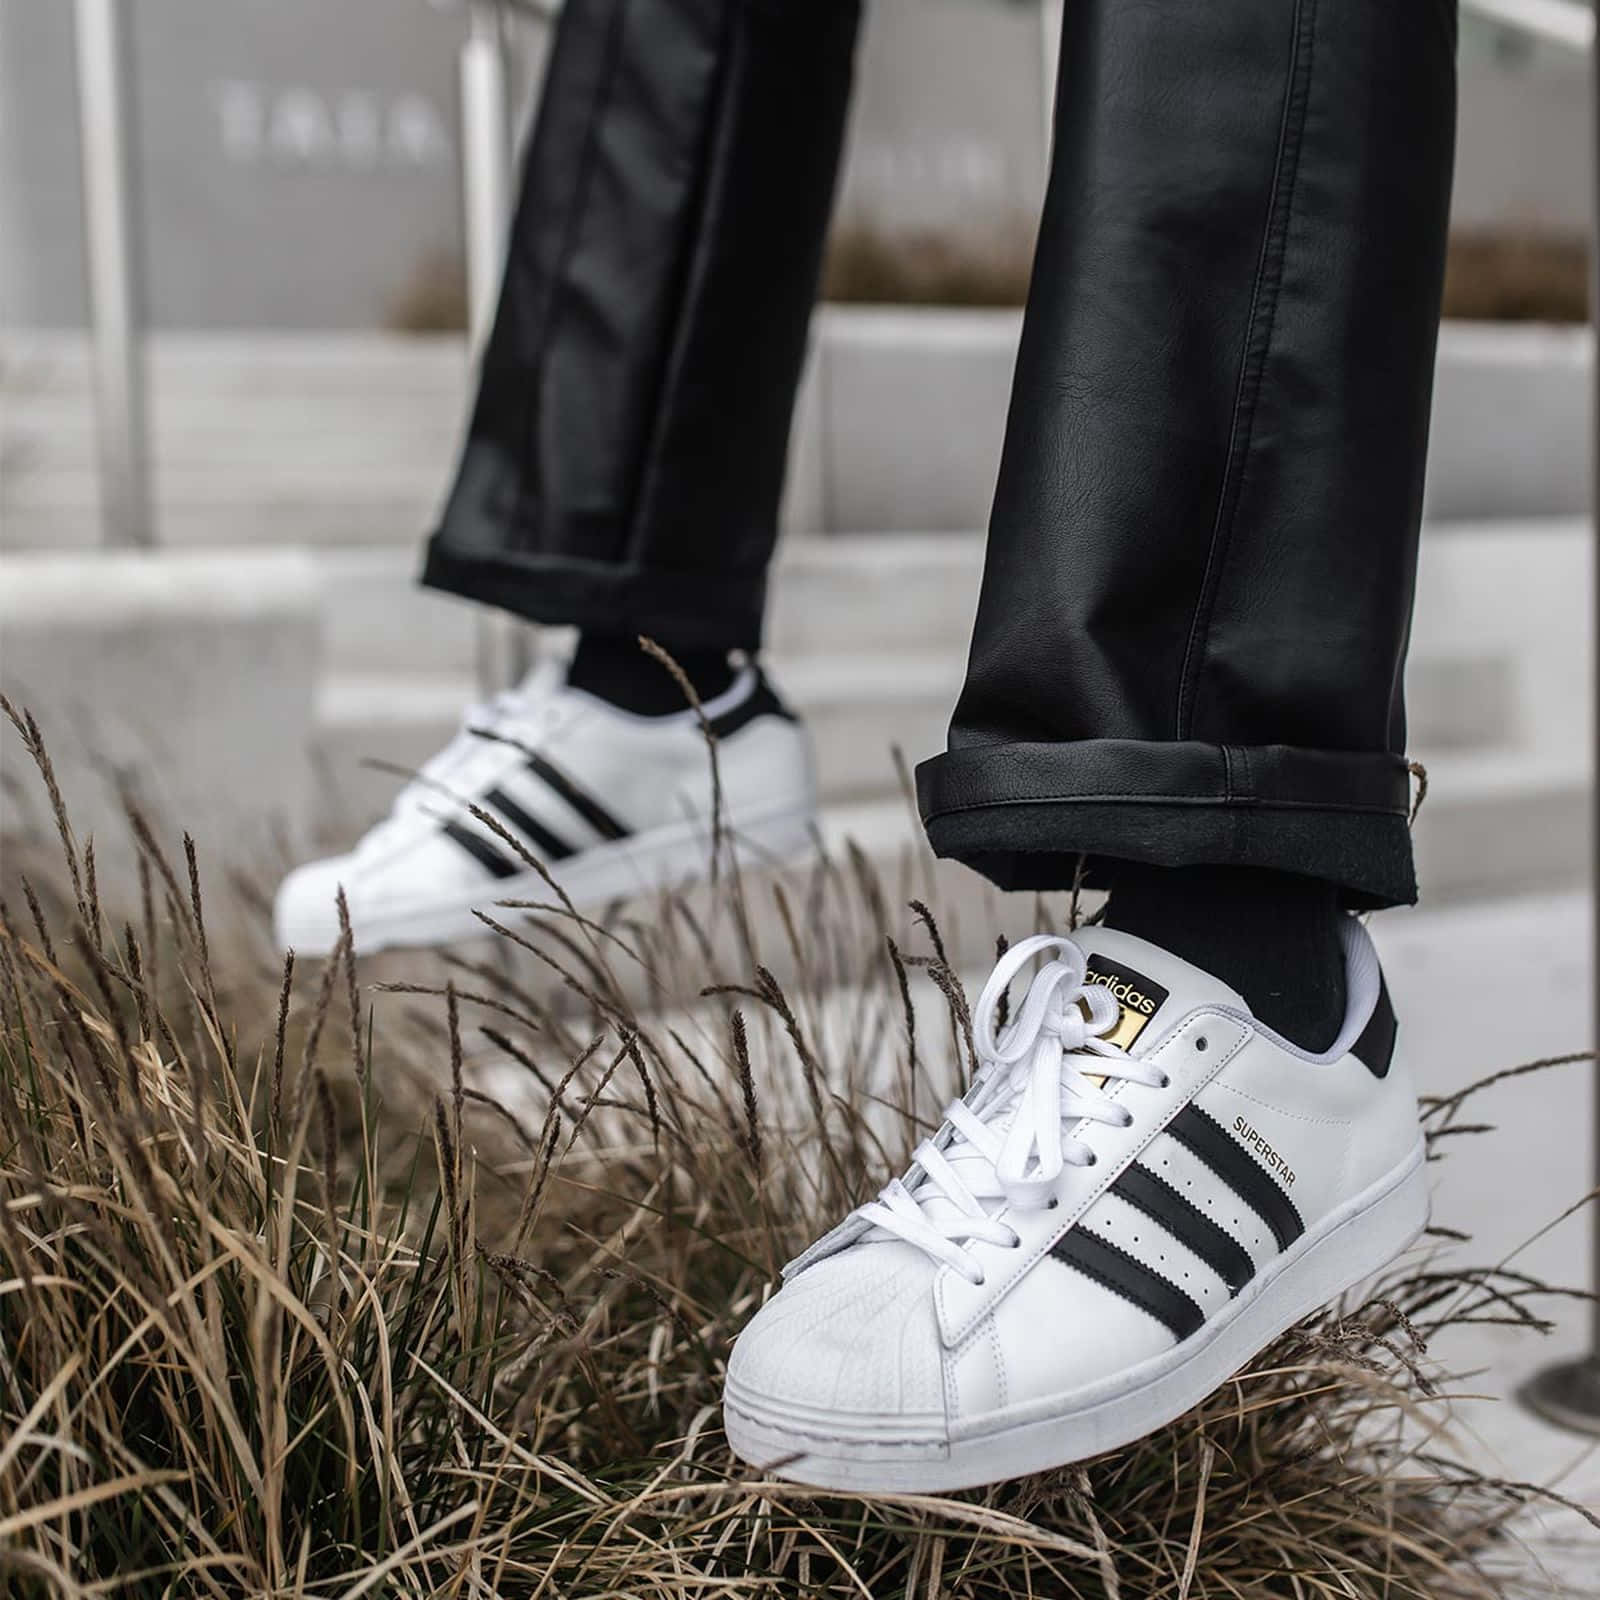 Step Up Your Style with Adidas